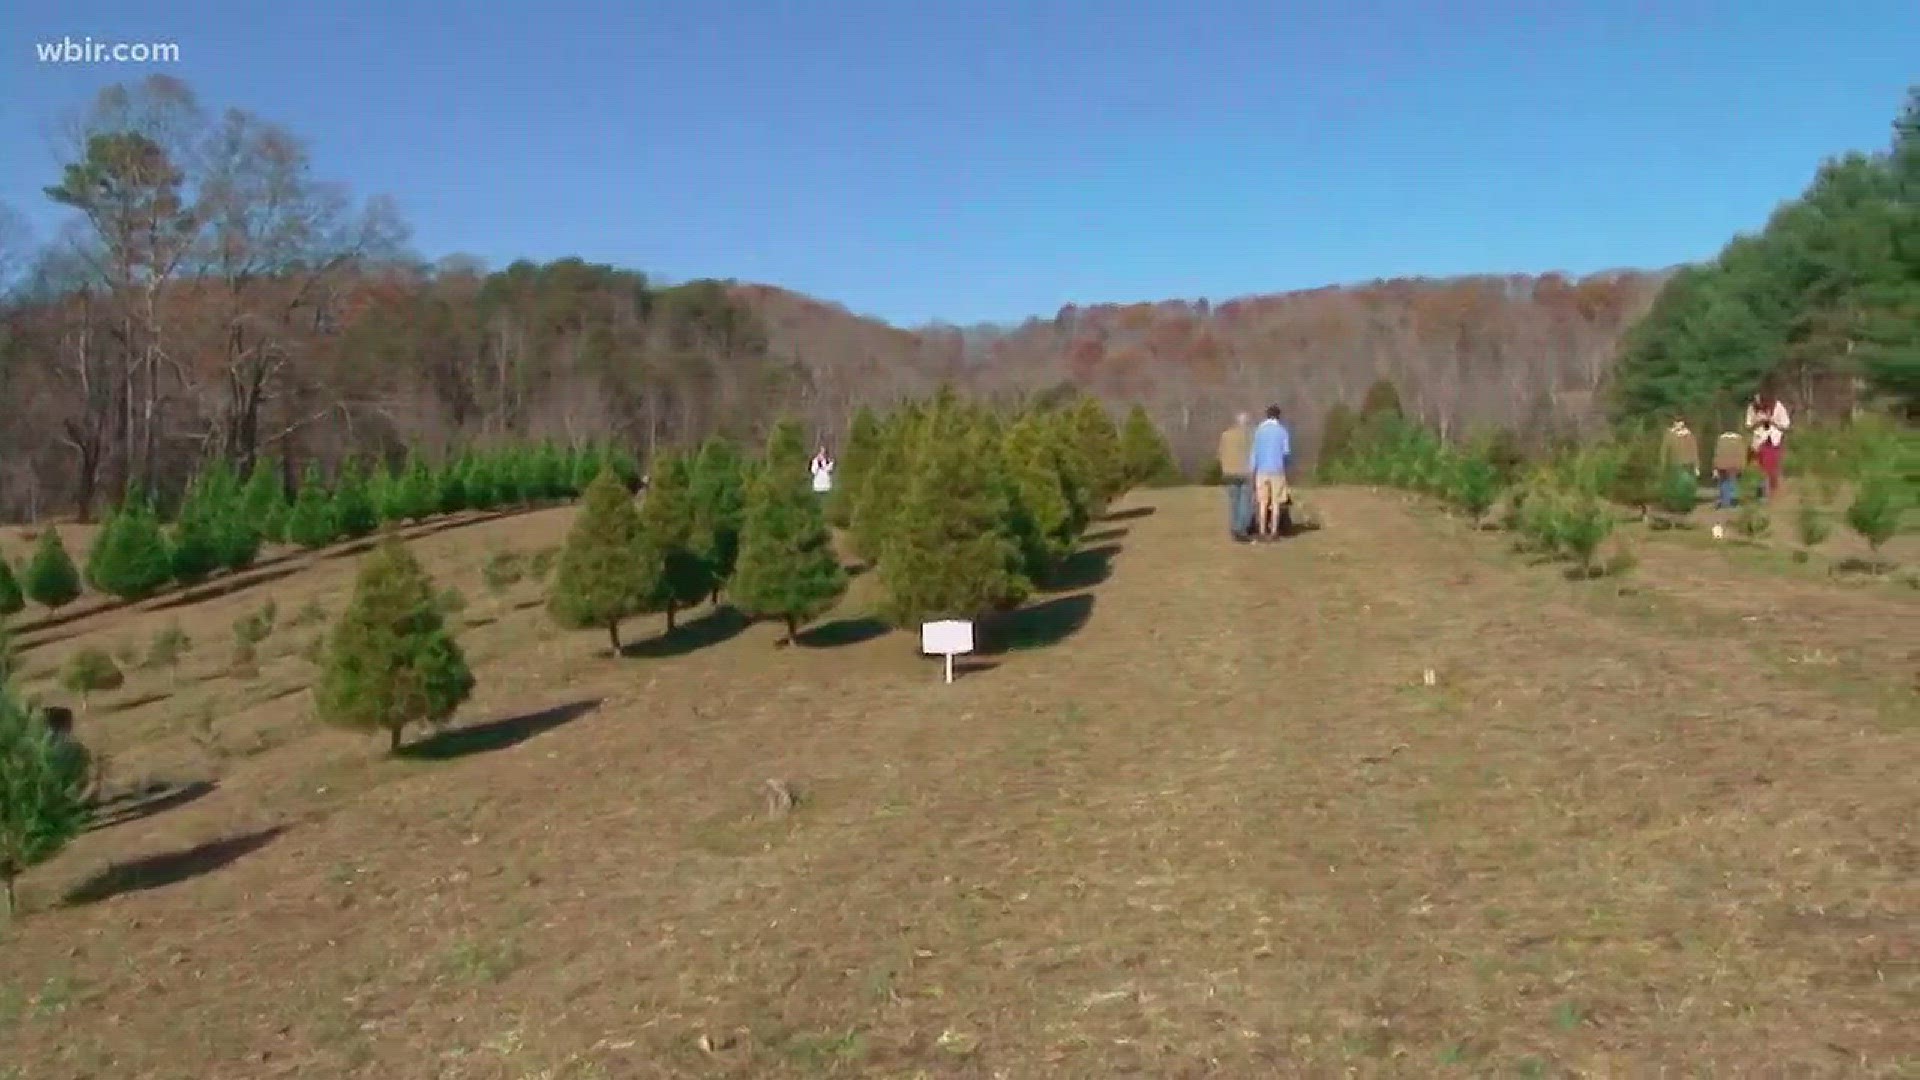 Nov. 24, 2017: This year Christmas trees will be more expensive and harder to find because of a nationwide shortage.